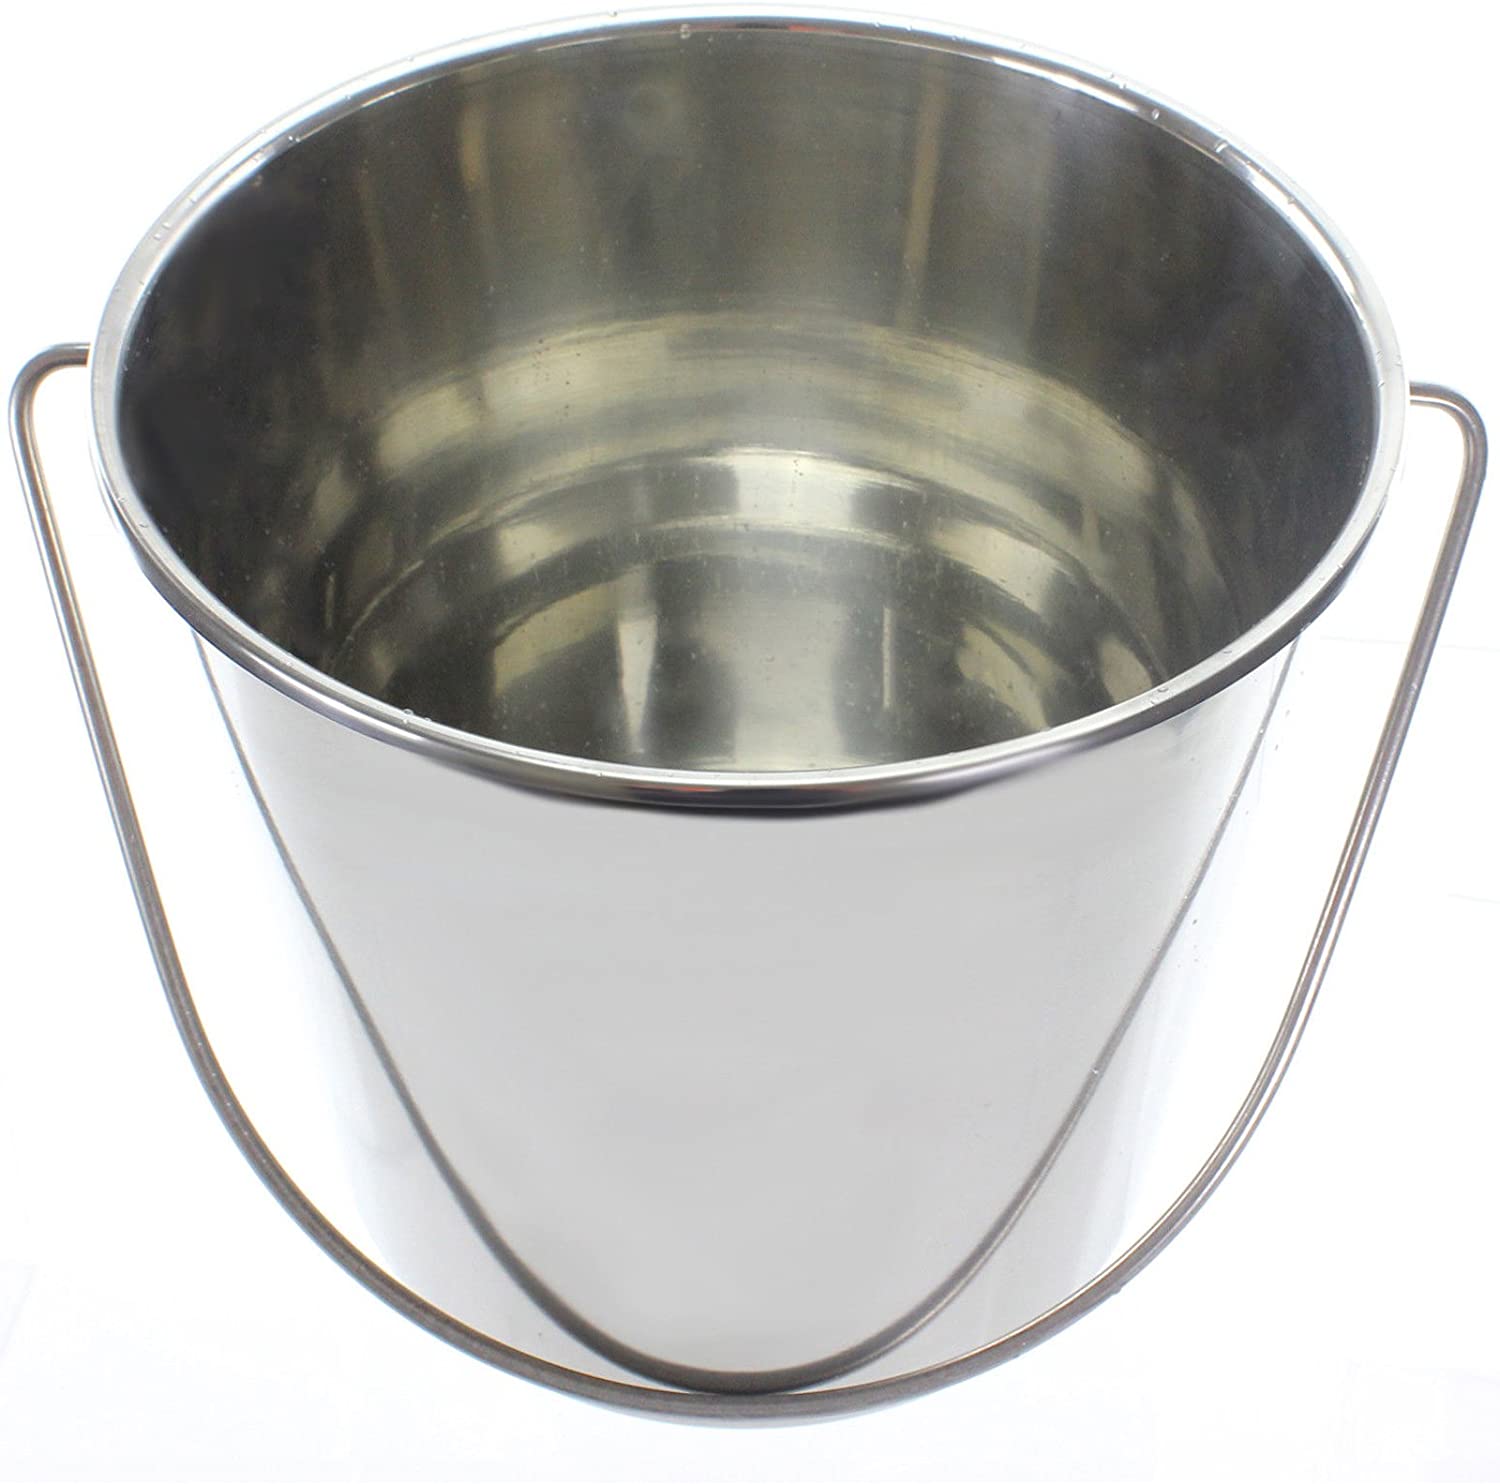 12 Litre Stainless Steel Handled Pail Bucket for Champagne & Ice (Silver, Pack of 5 Buckets)